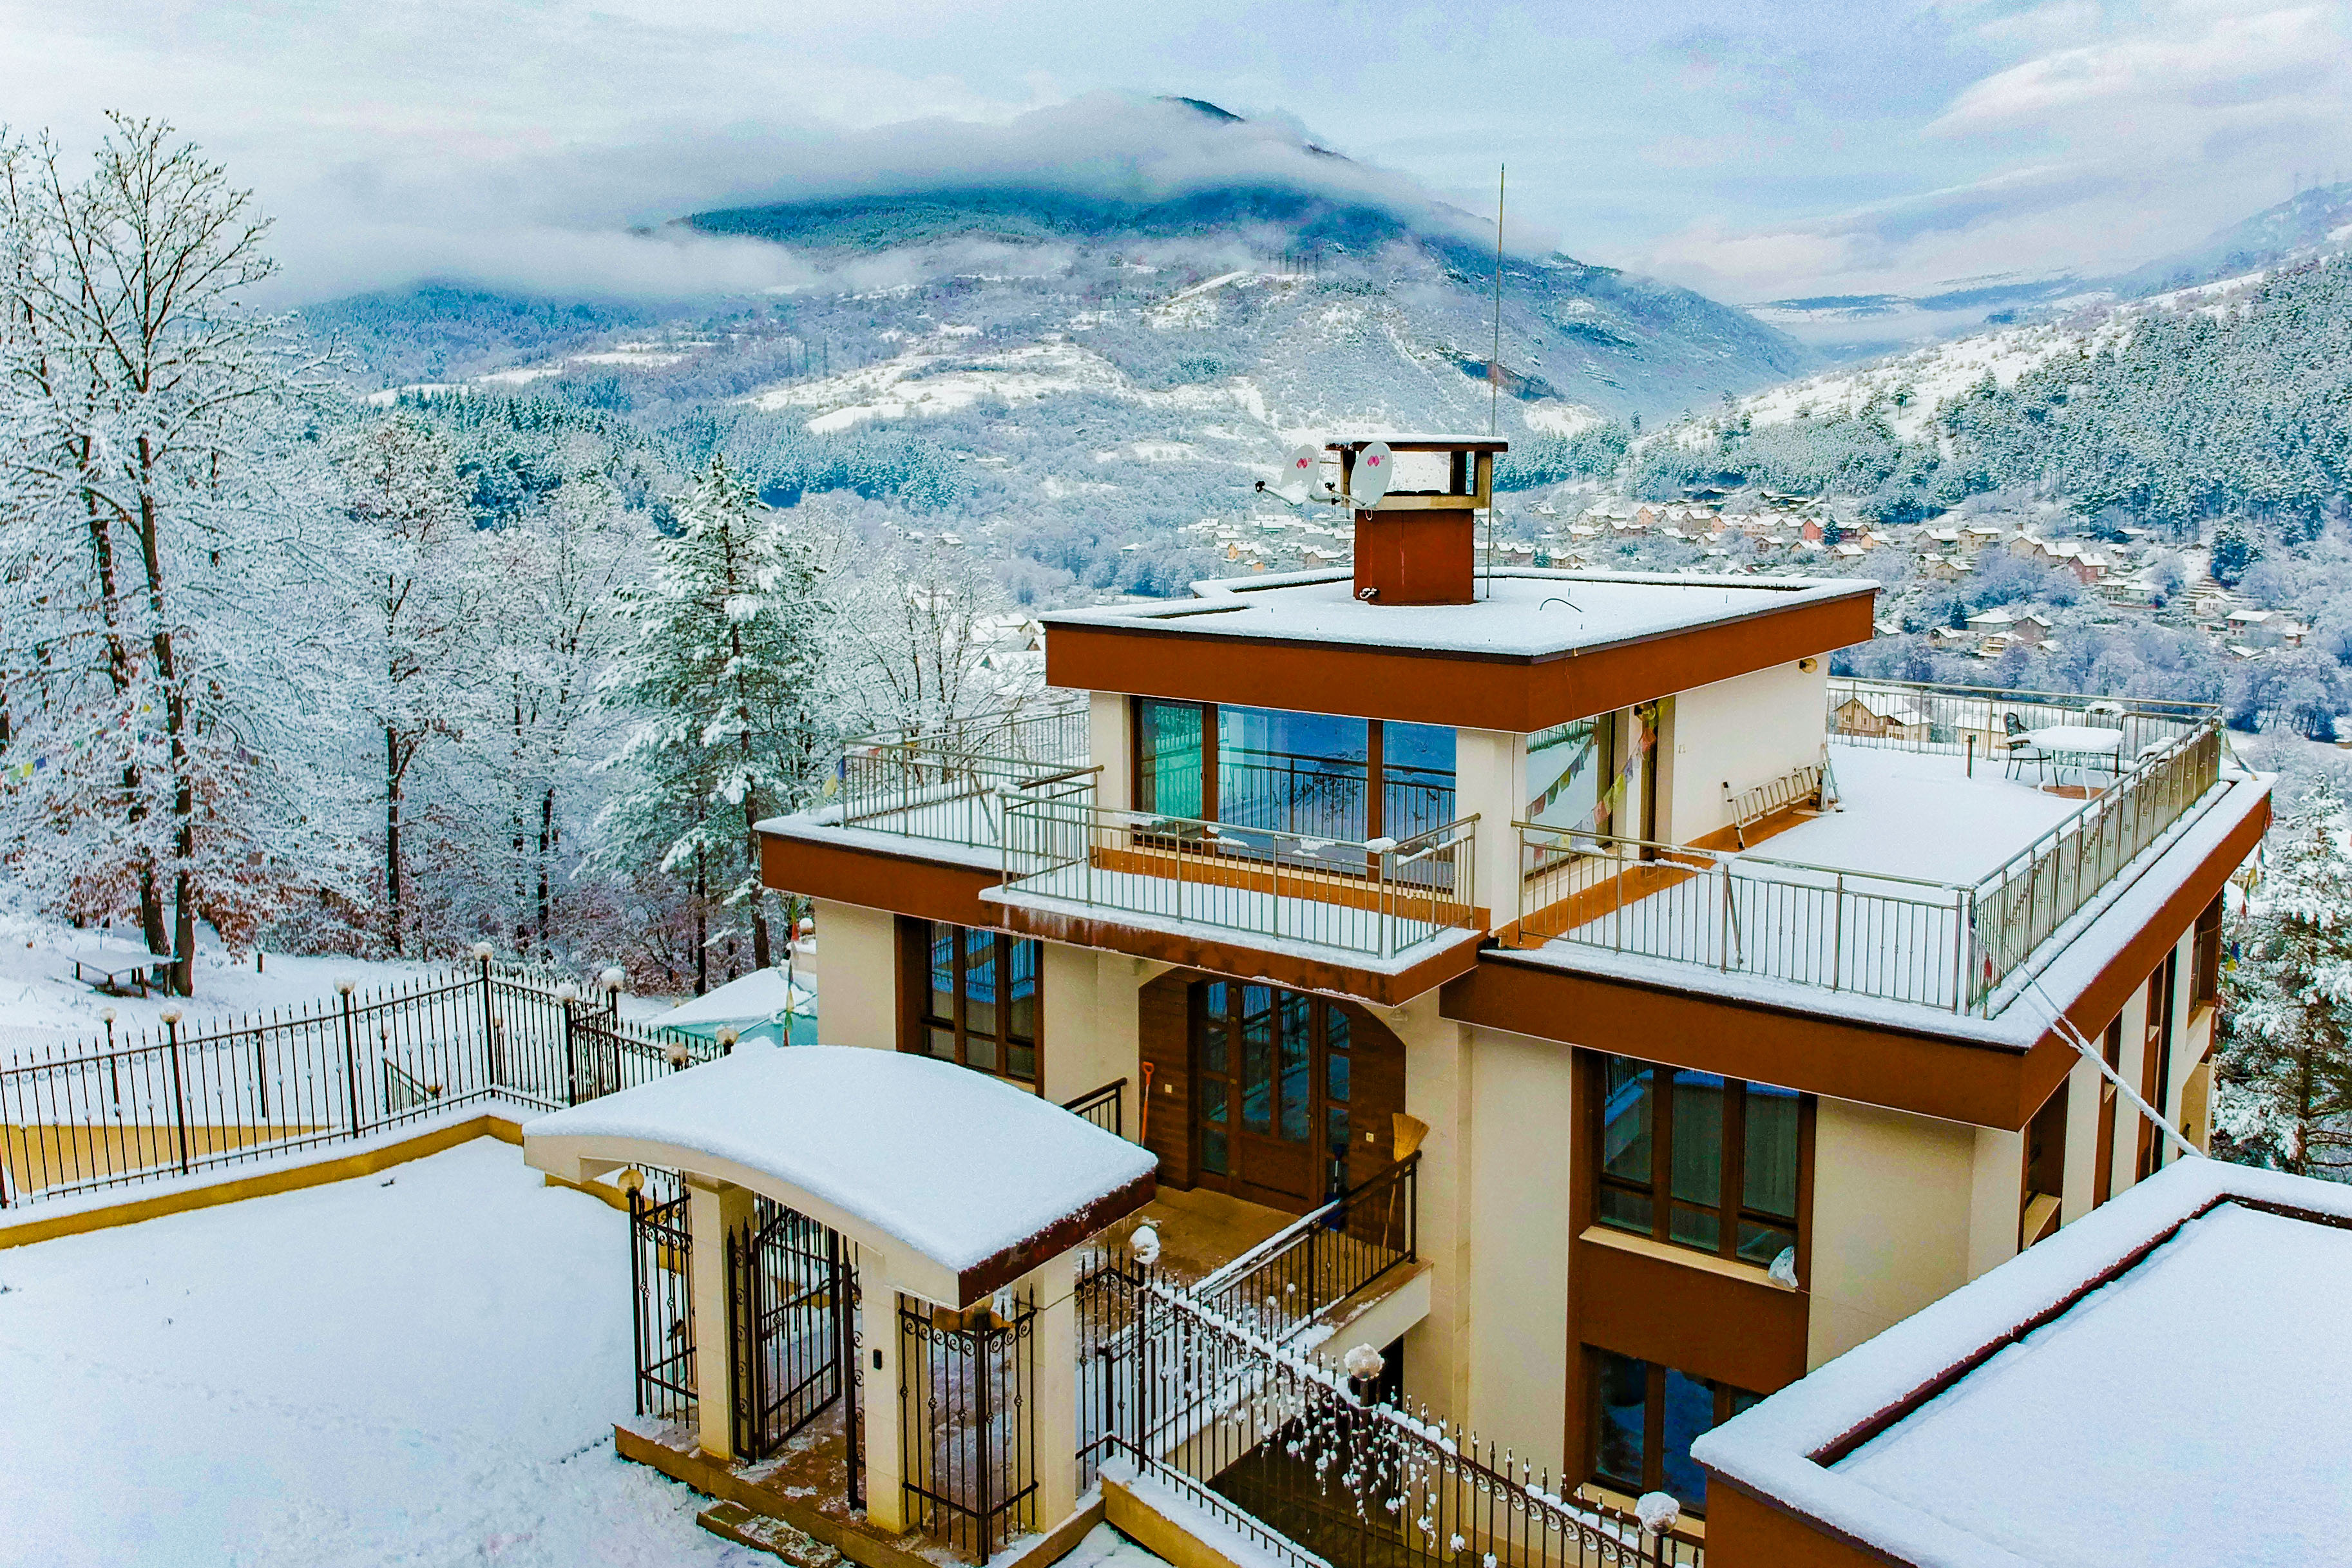 370-winter-view-and-house.jpg